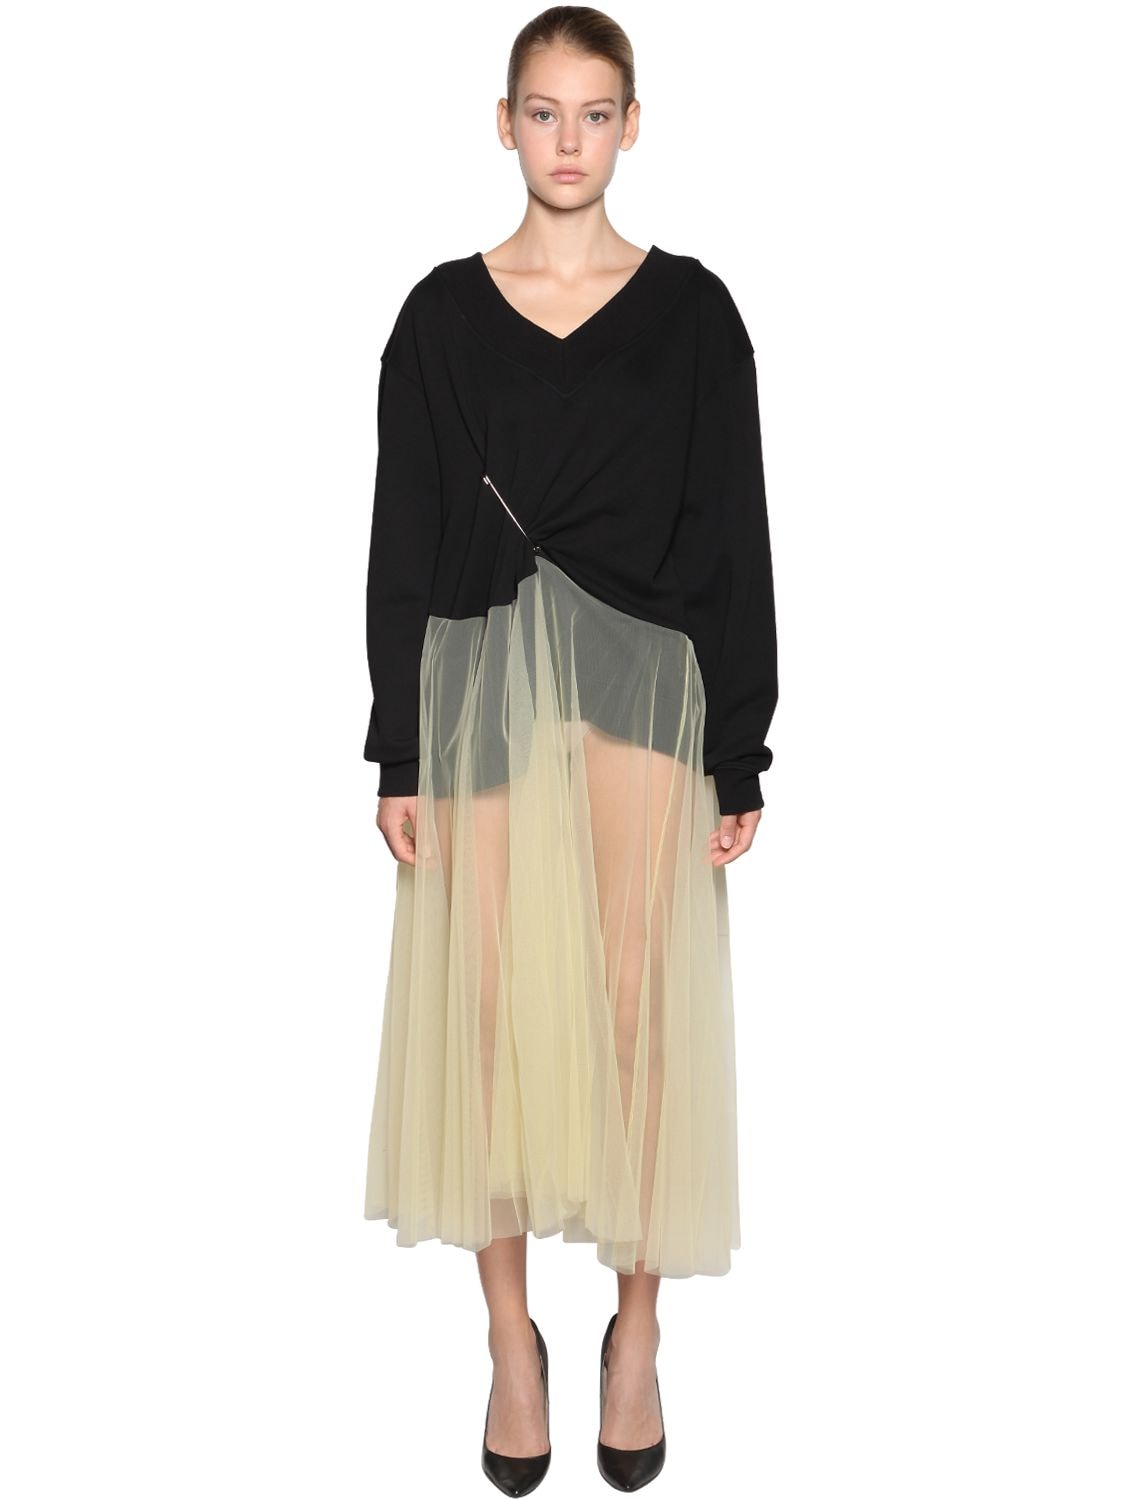 Act N°1 Cotton Jumper W/ Tulle Skirt Dress In Black,yellow